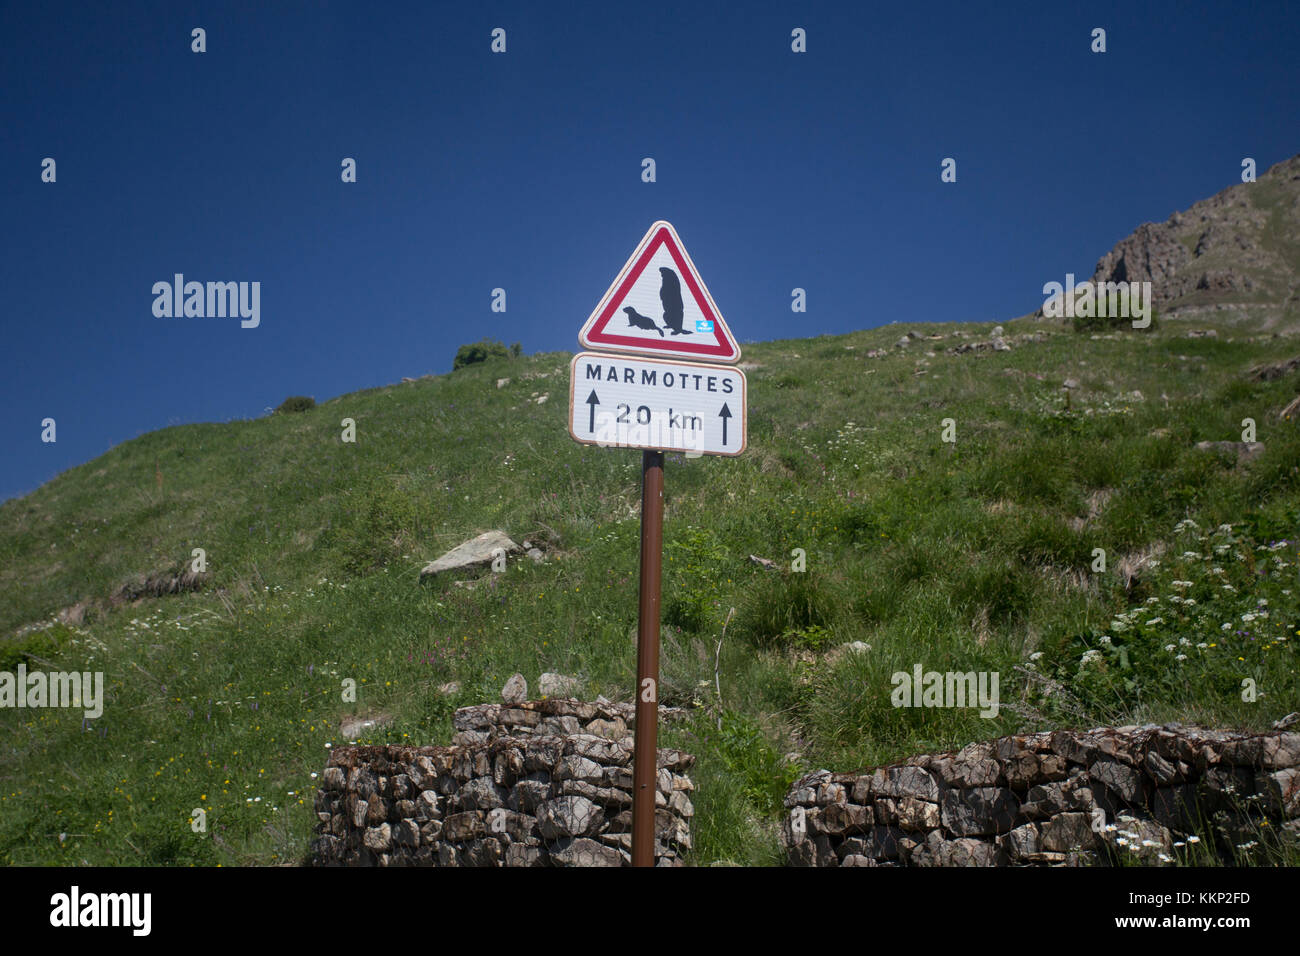 French road sign warning of Marmots near road, Mercantour National Park Stock Photo